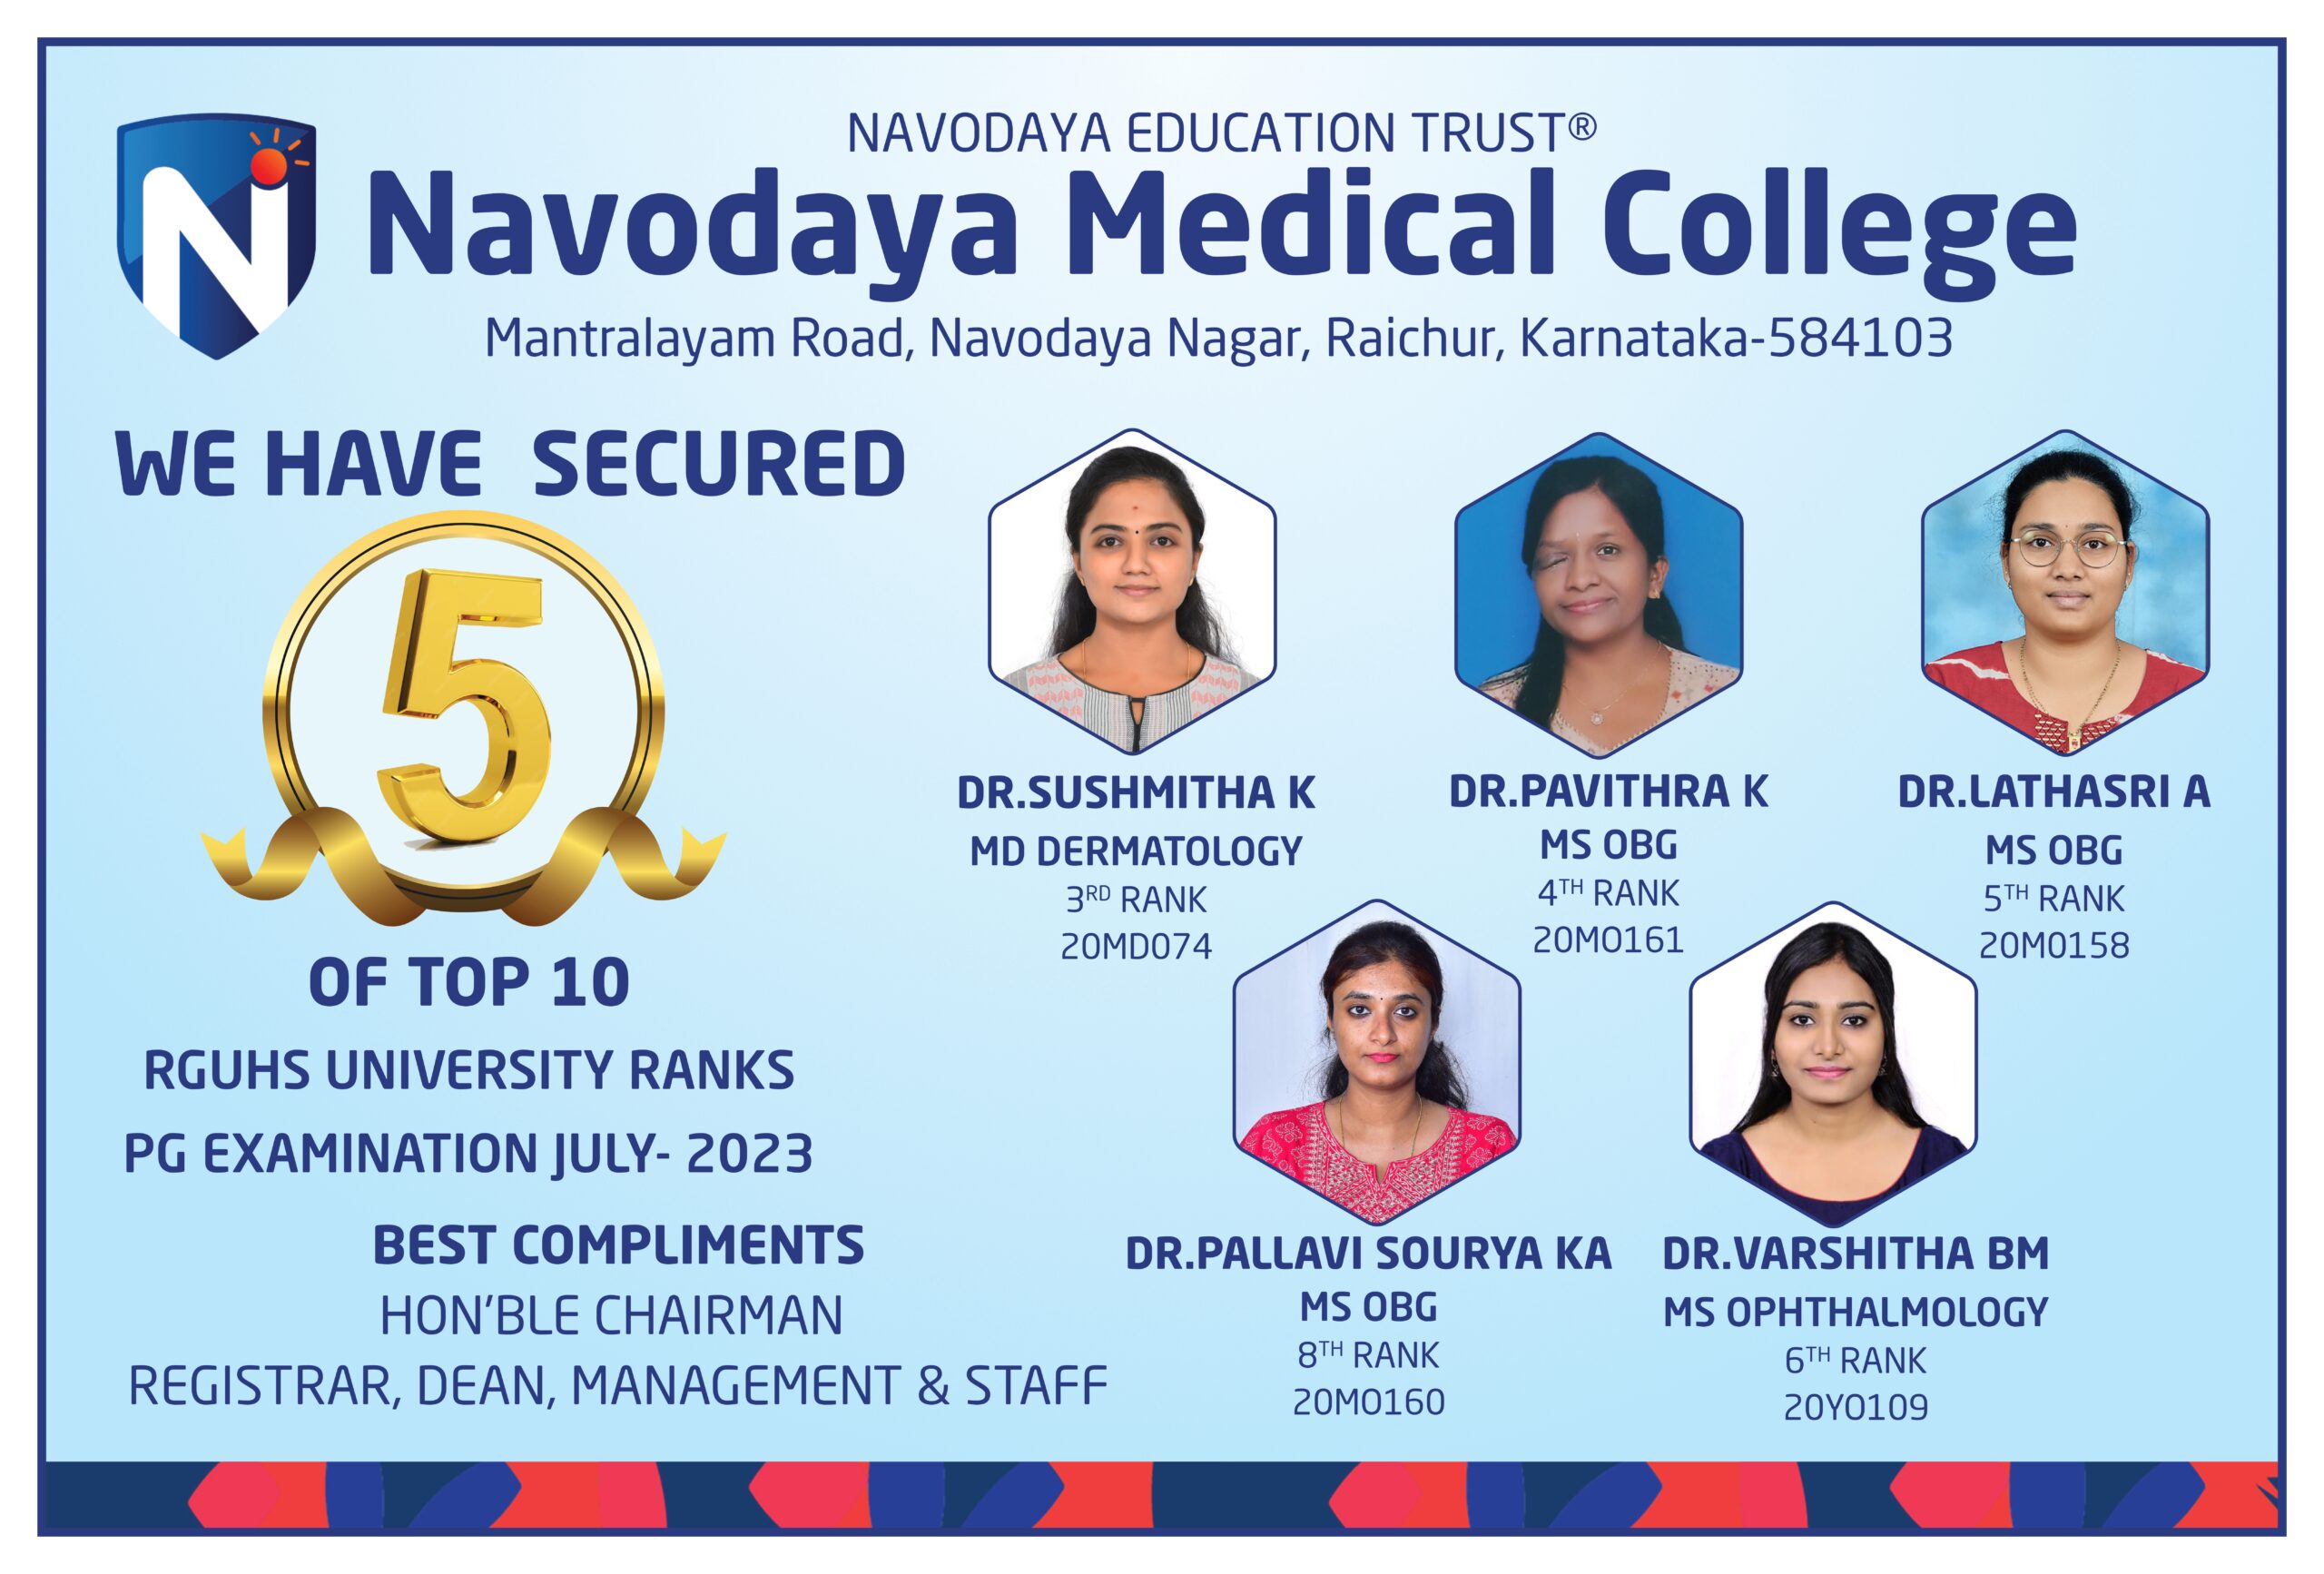 The Hon’ble Chairman, The Management of Navodaya Education Trust and the Principal of Navodaya Medical College, Raichur are immensely pleased and feeling very proud of our Post Graduate Degree Students Achievement